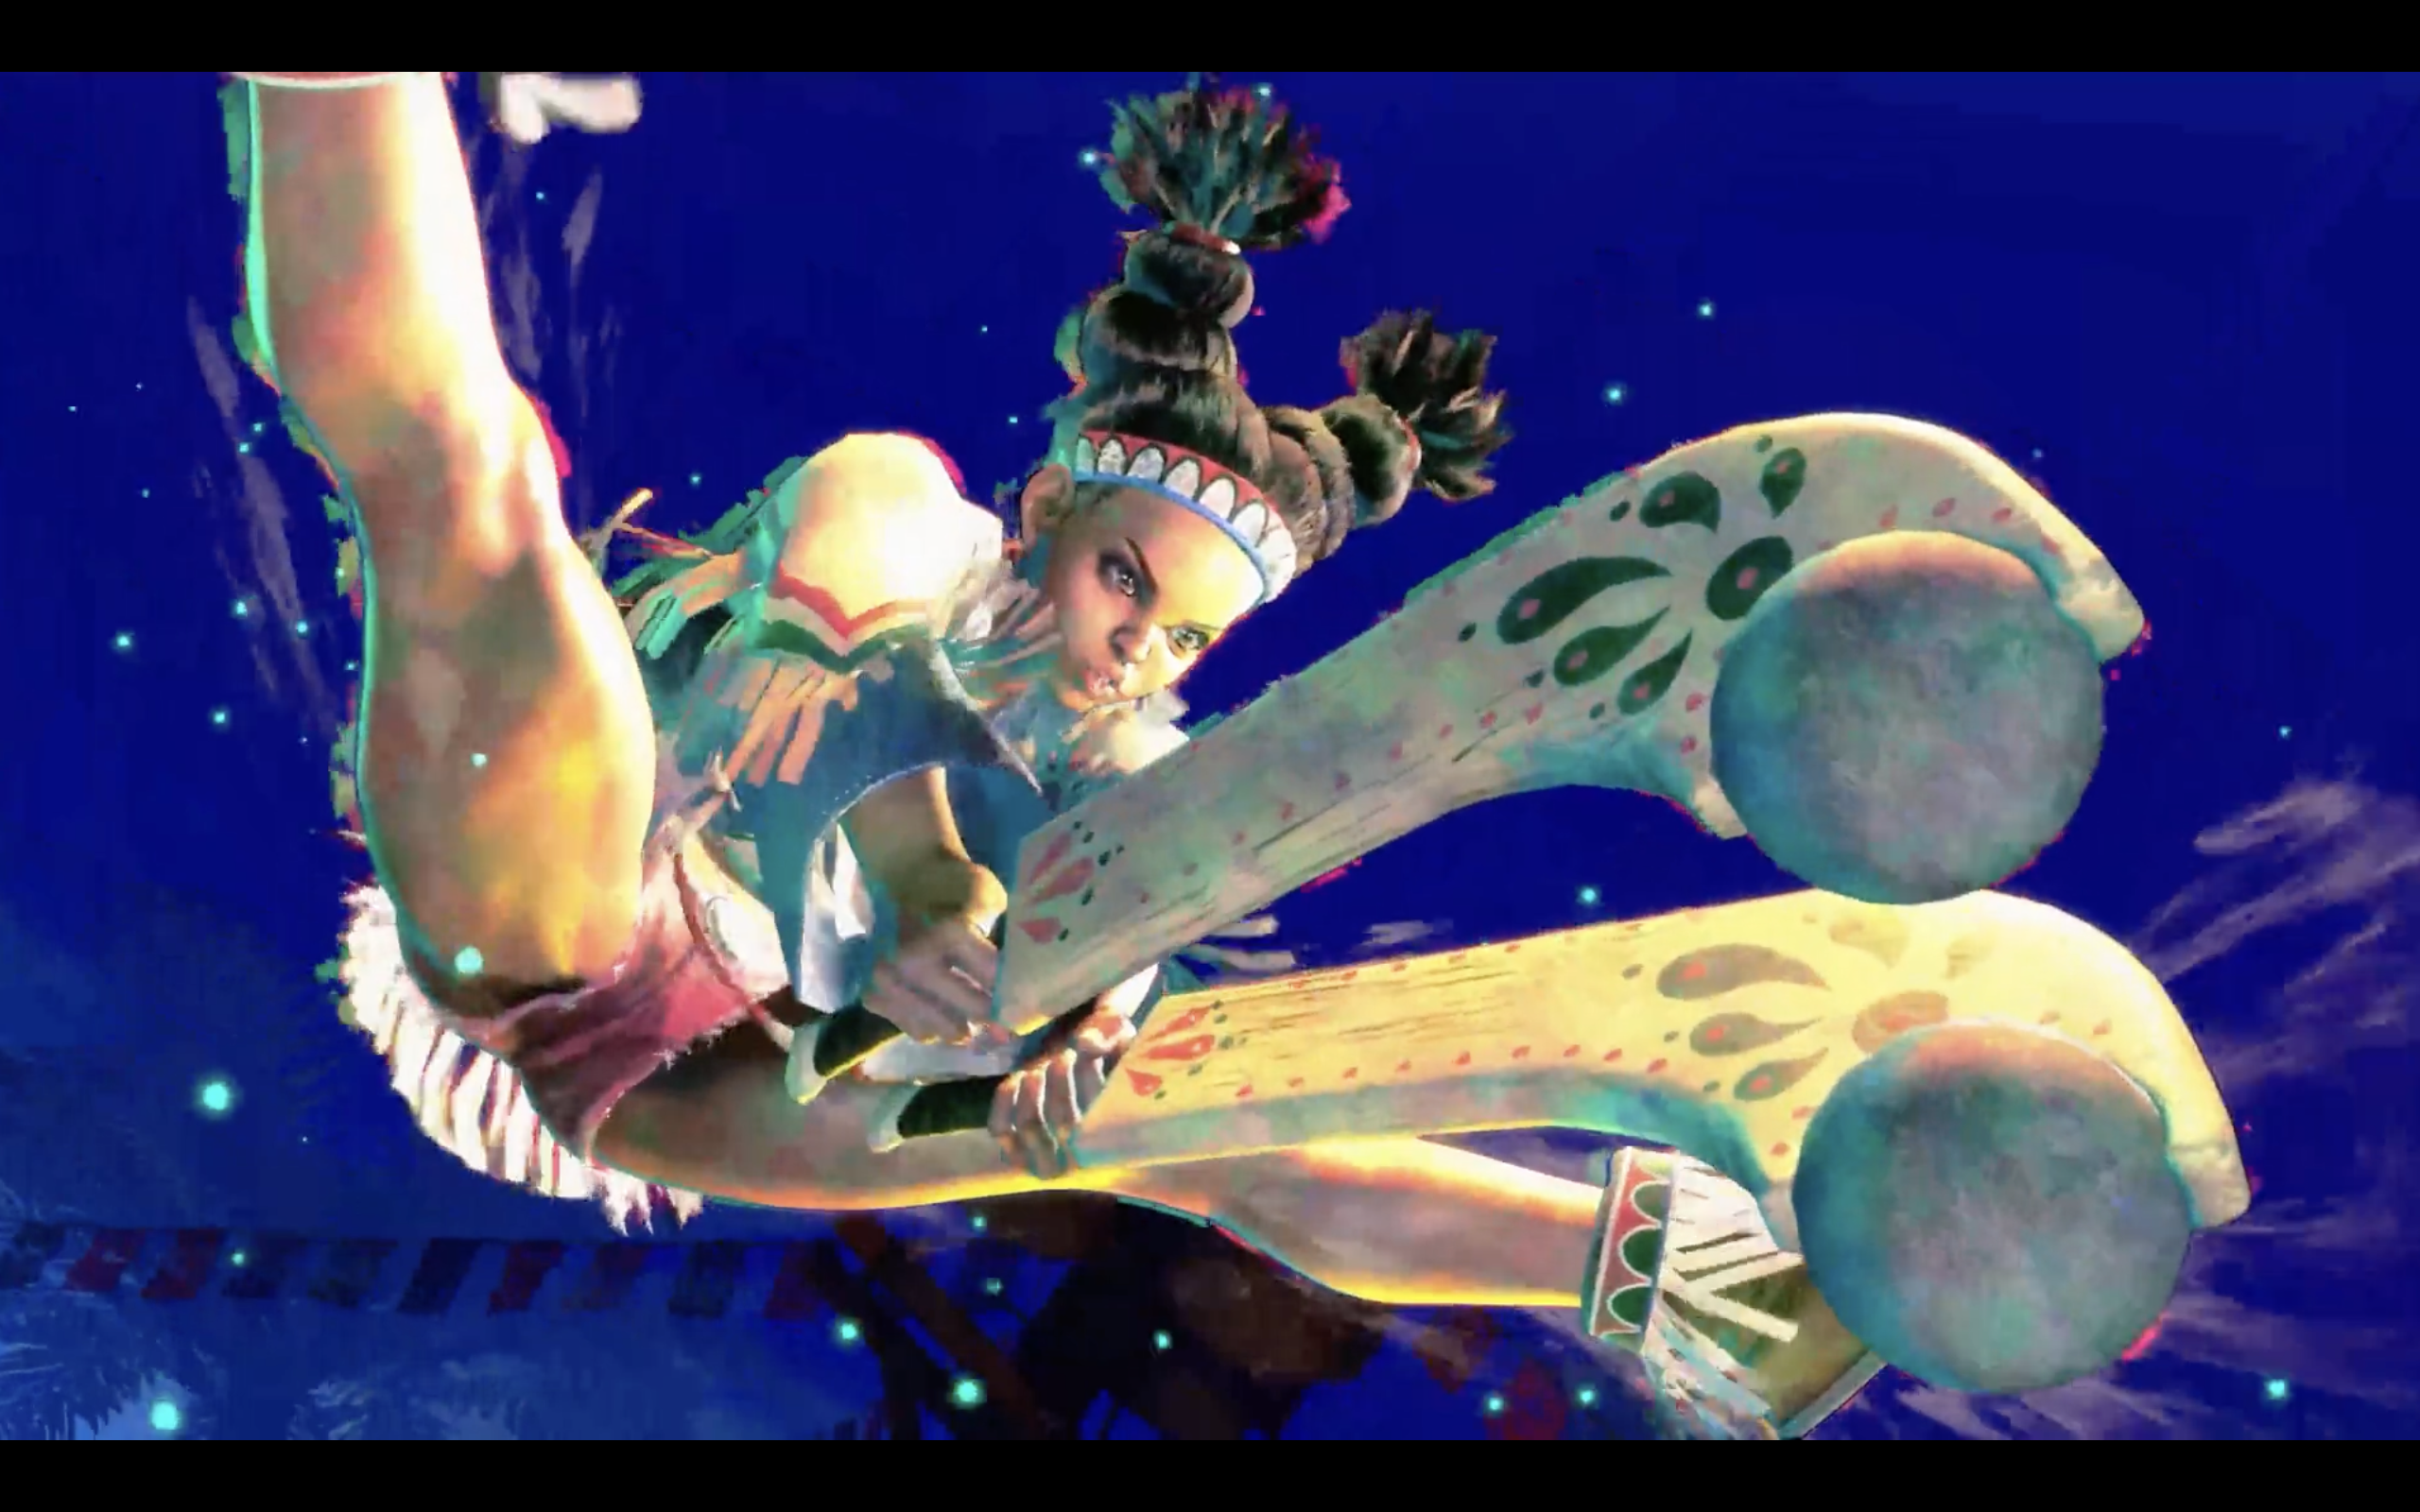 Reactions, analysis, and what you missed in the new Cammy, Zangief, and  Lily Street Fighter 6 trailer